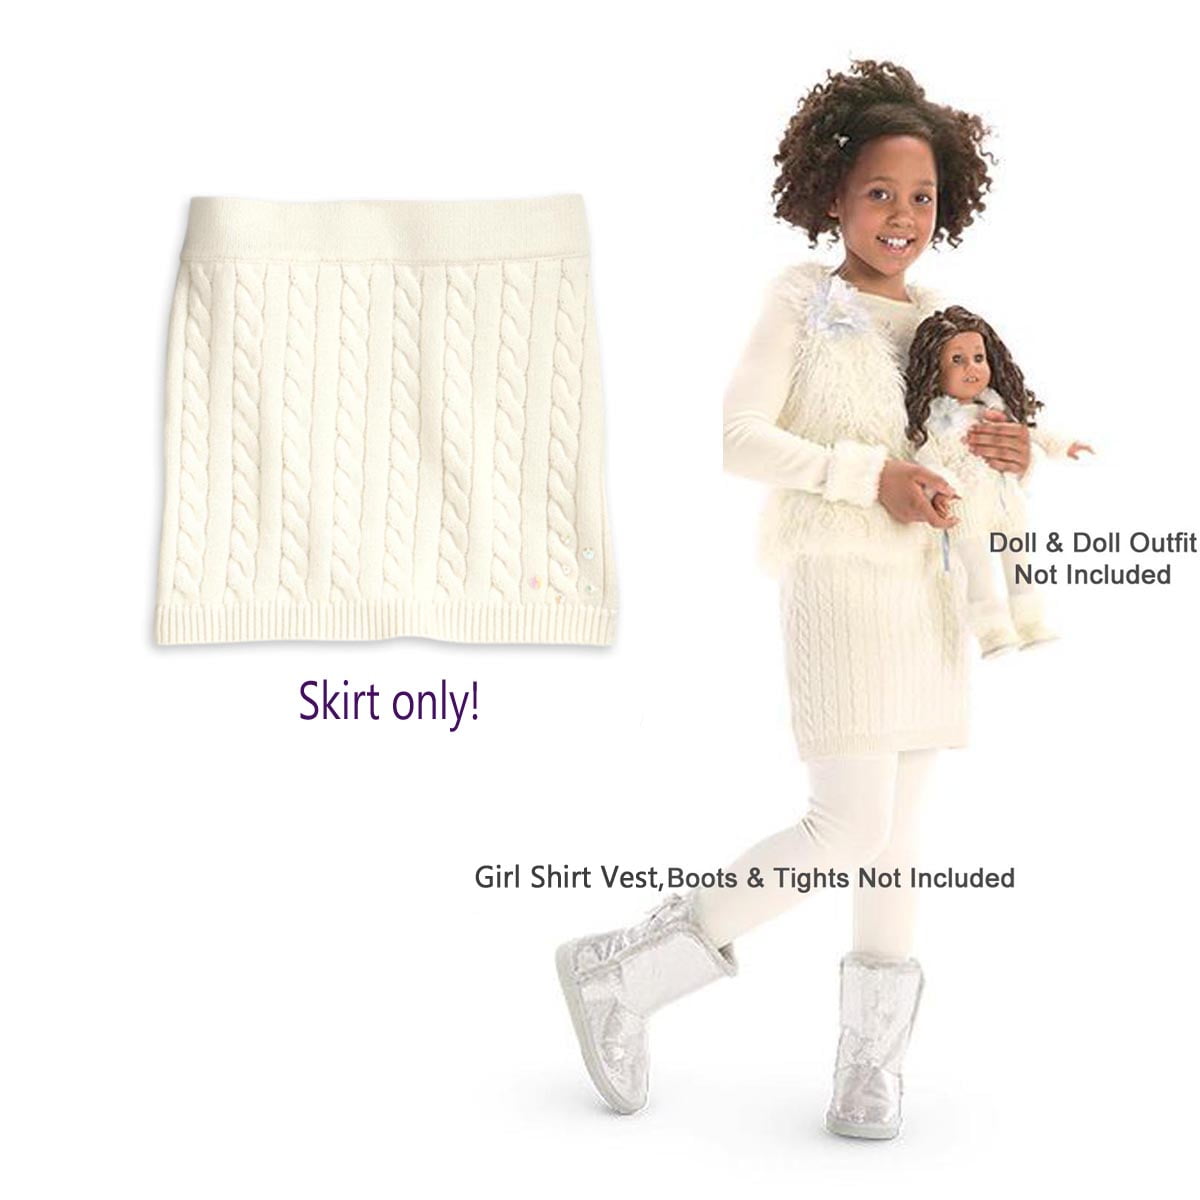 AUTHENTIC AMERICAN GIRL 2014 WINTER WHITE OUTFIT 894 BOX FOR 18" DOLLS 